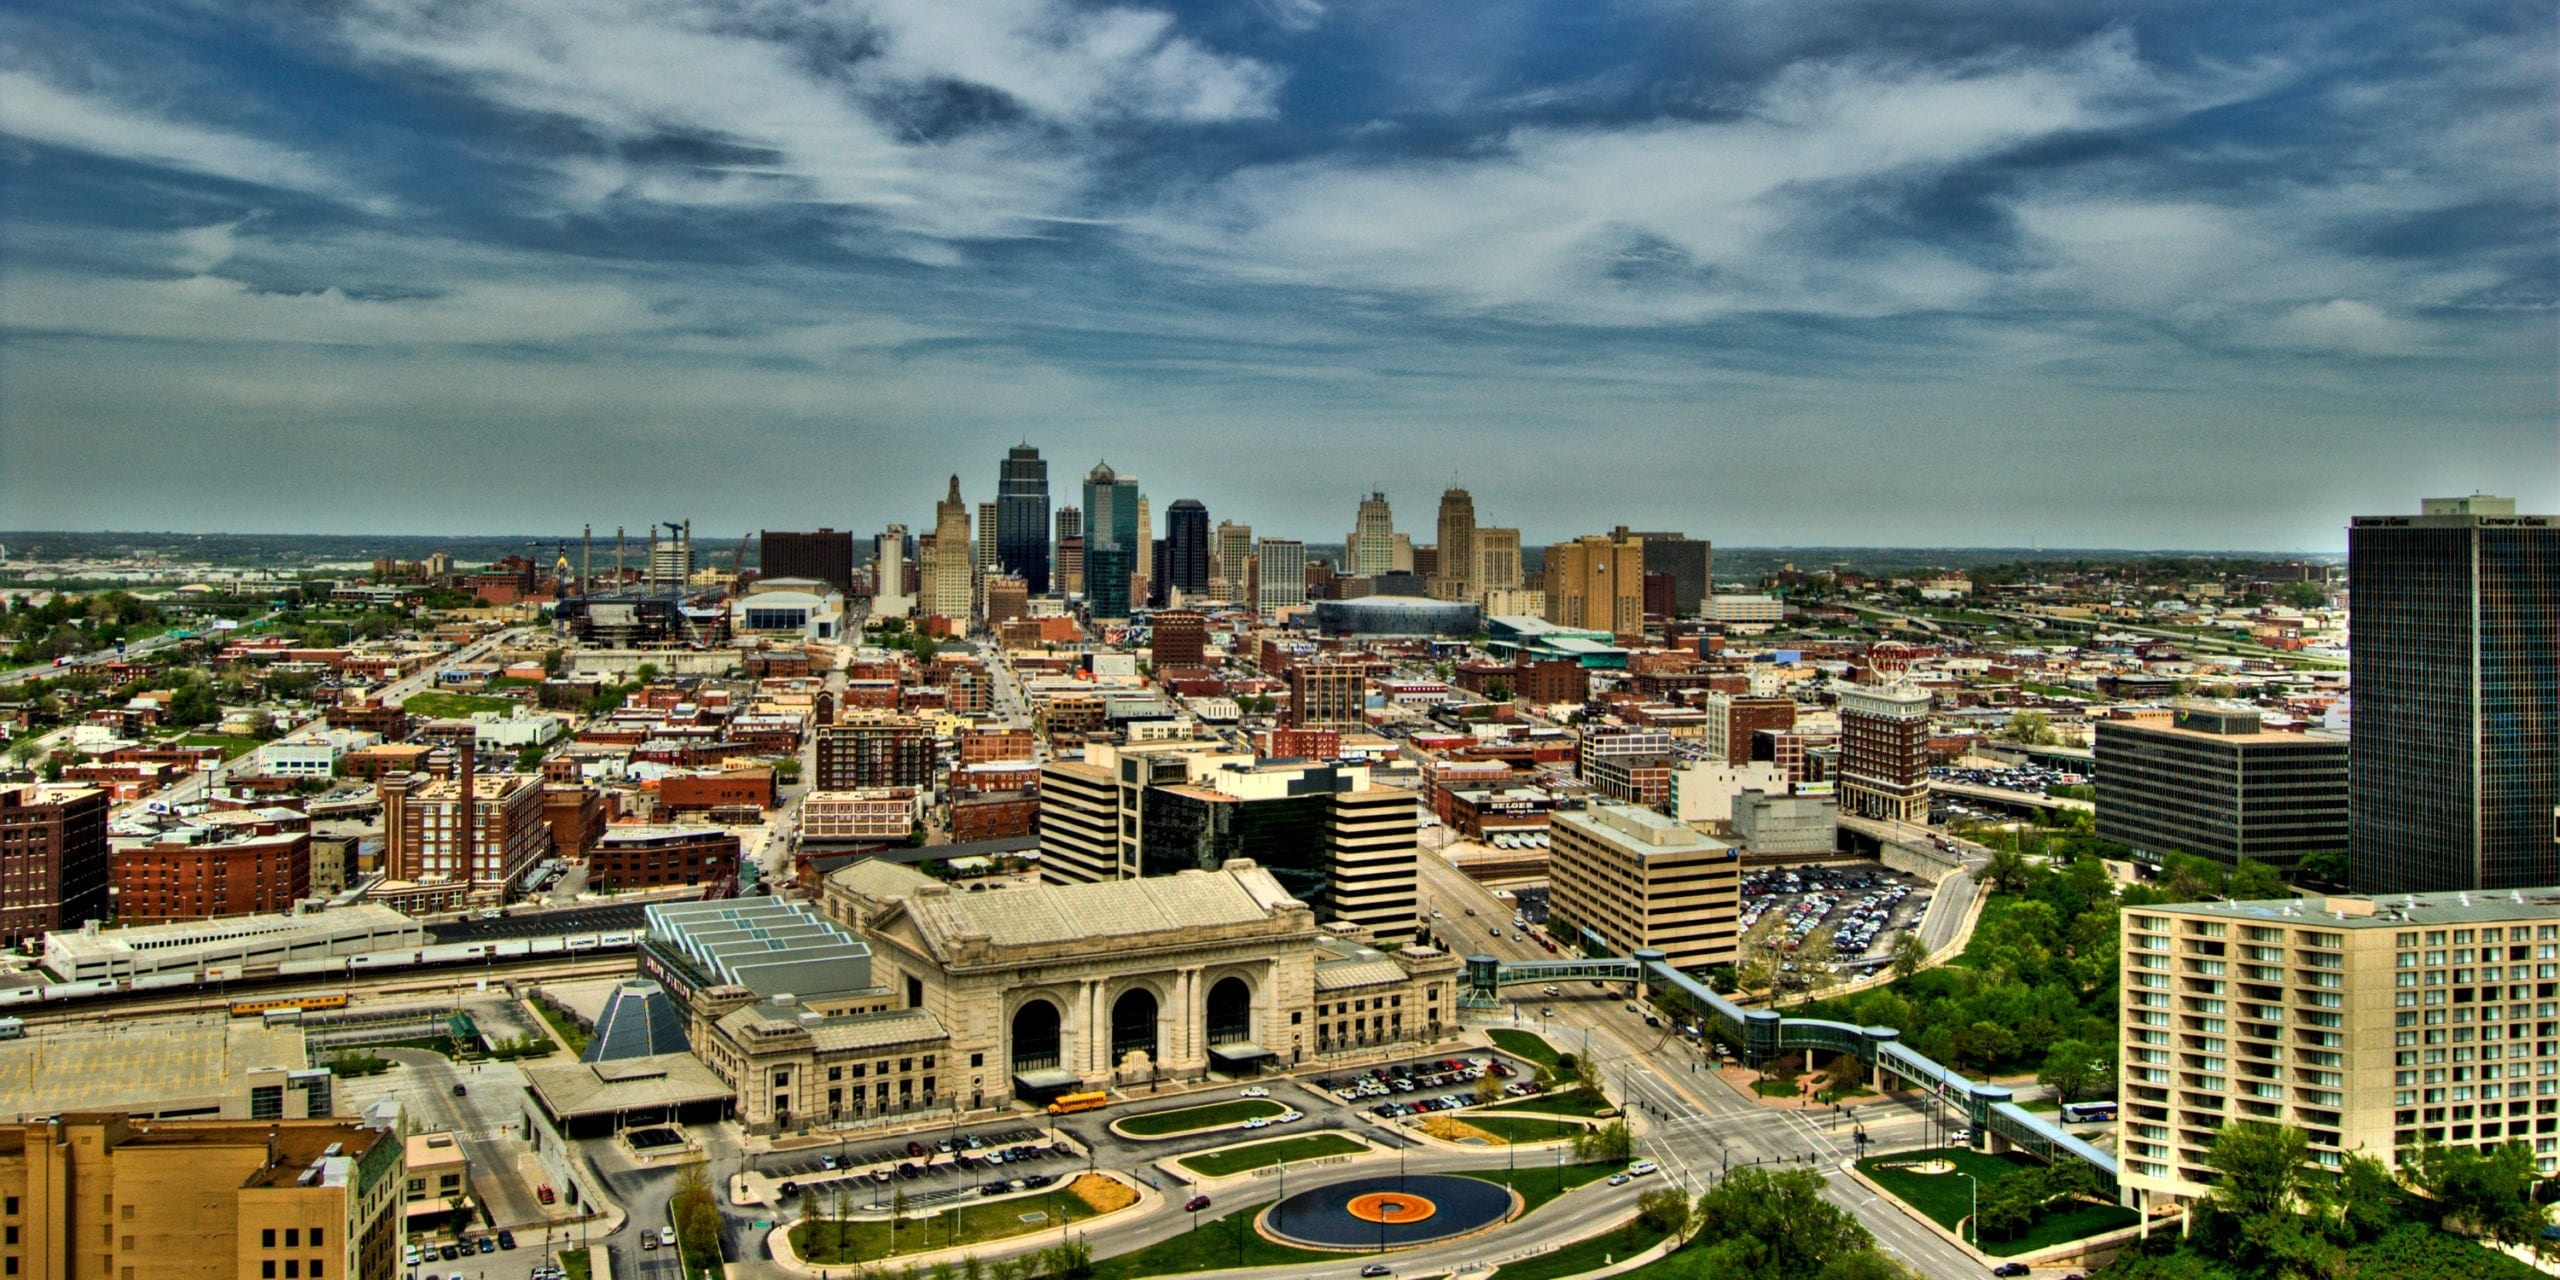 Kansas City: Officially nicknamed the “City of Fountains”, Urban landscape. 2560x1280 Dual Screen Background.